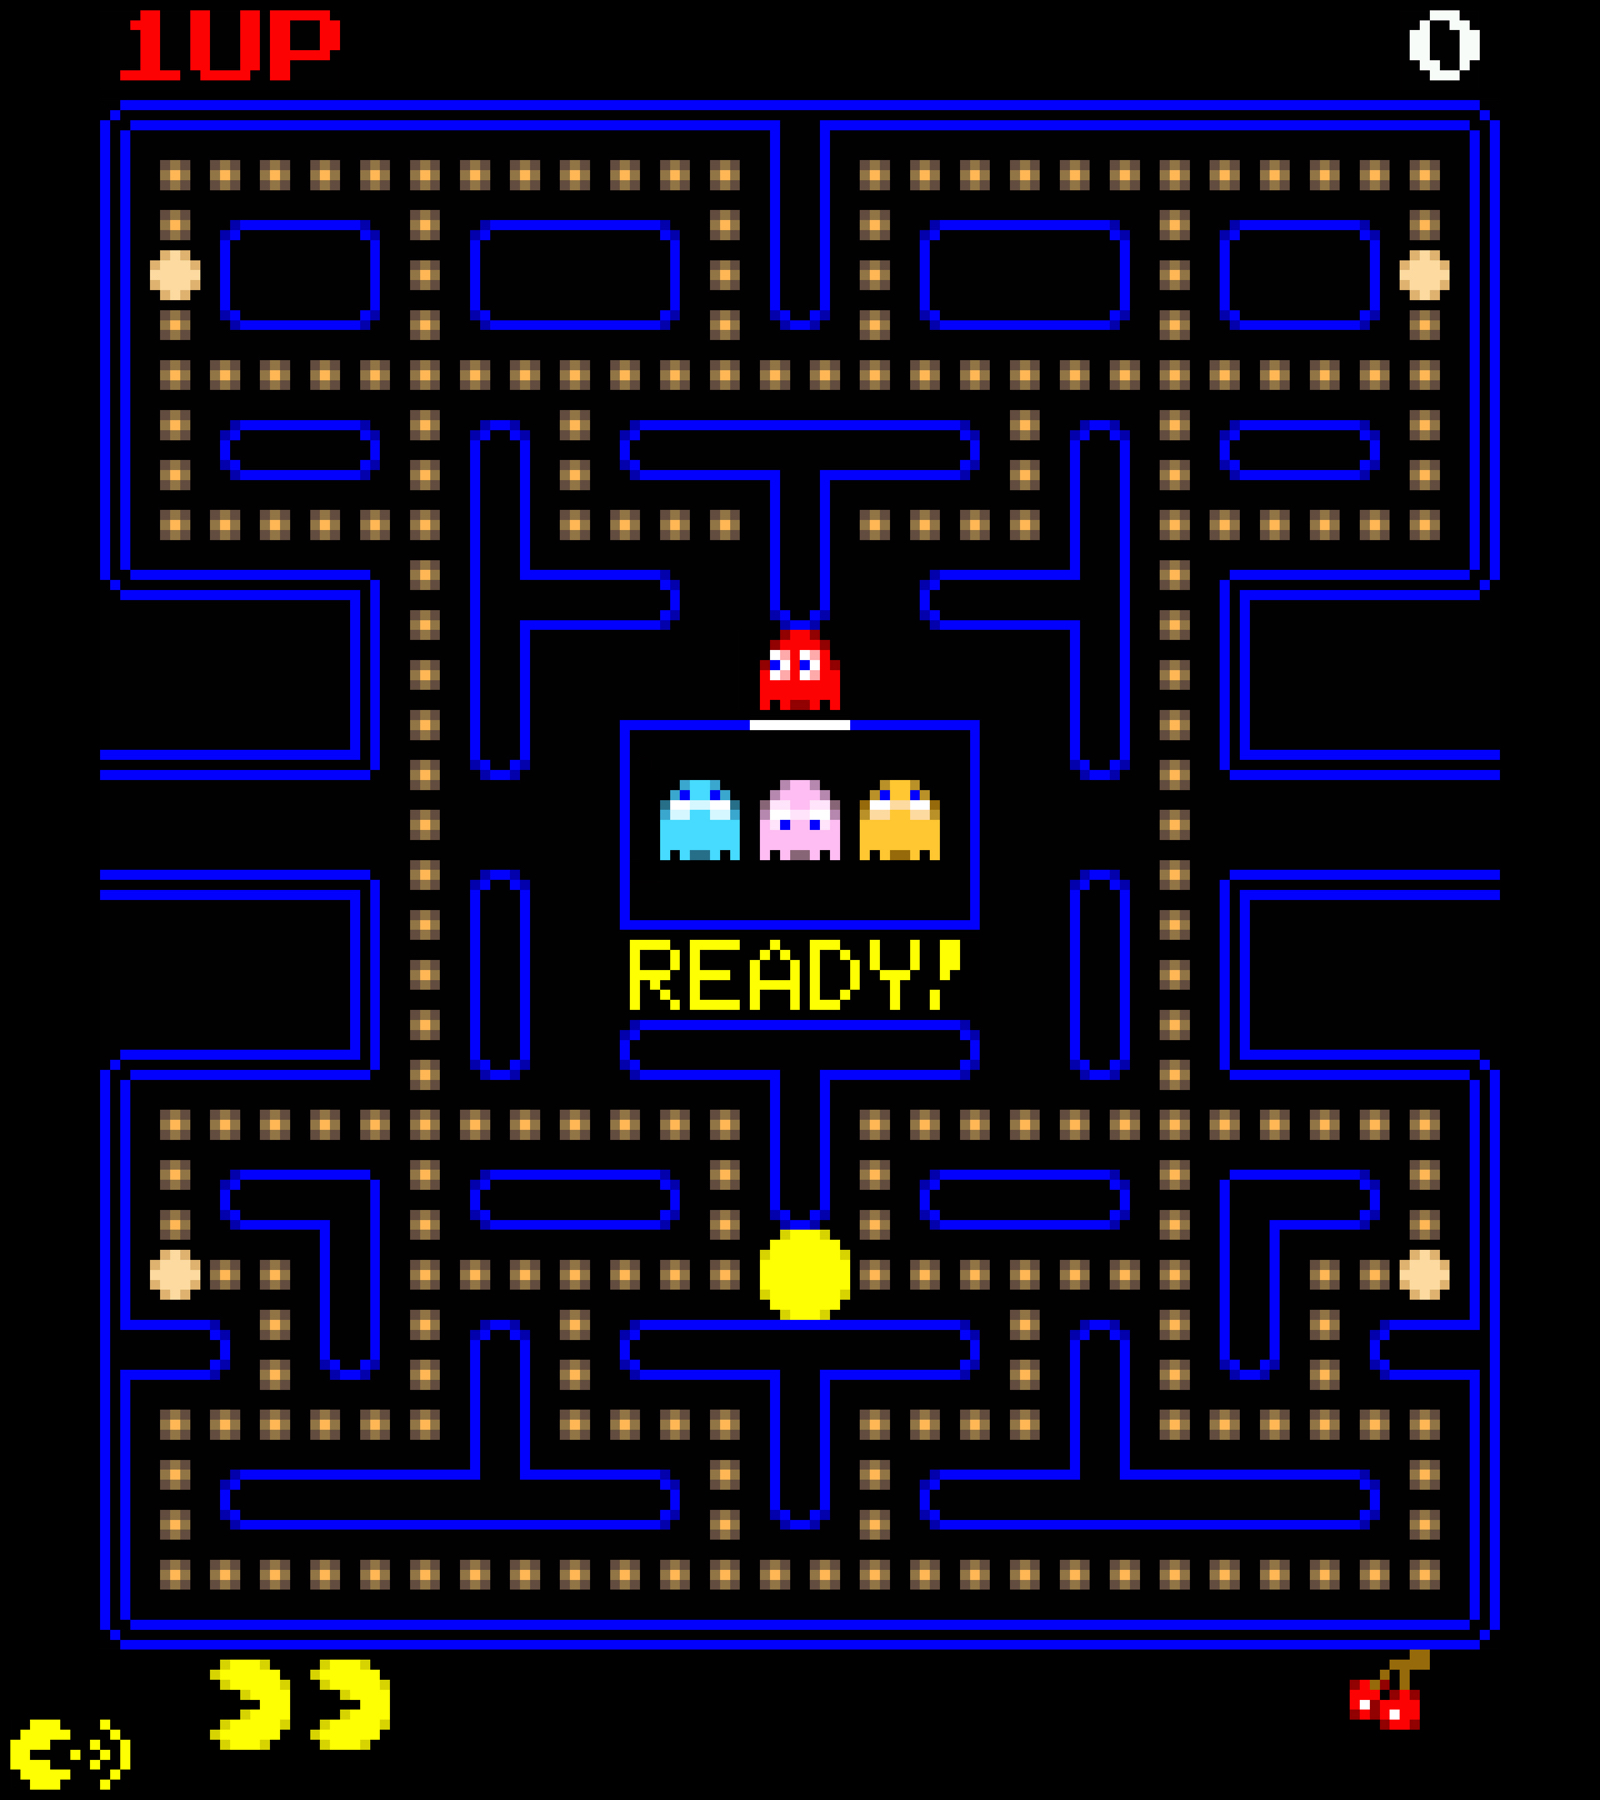 Buy Pac-Man for VIC20